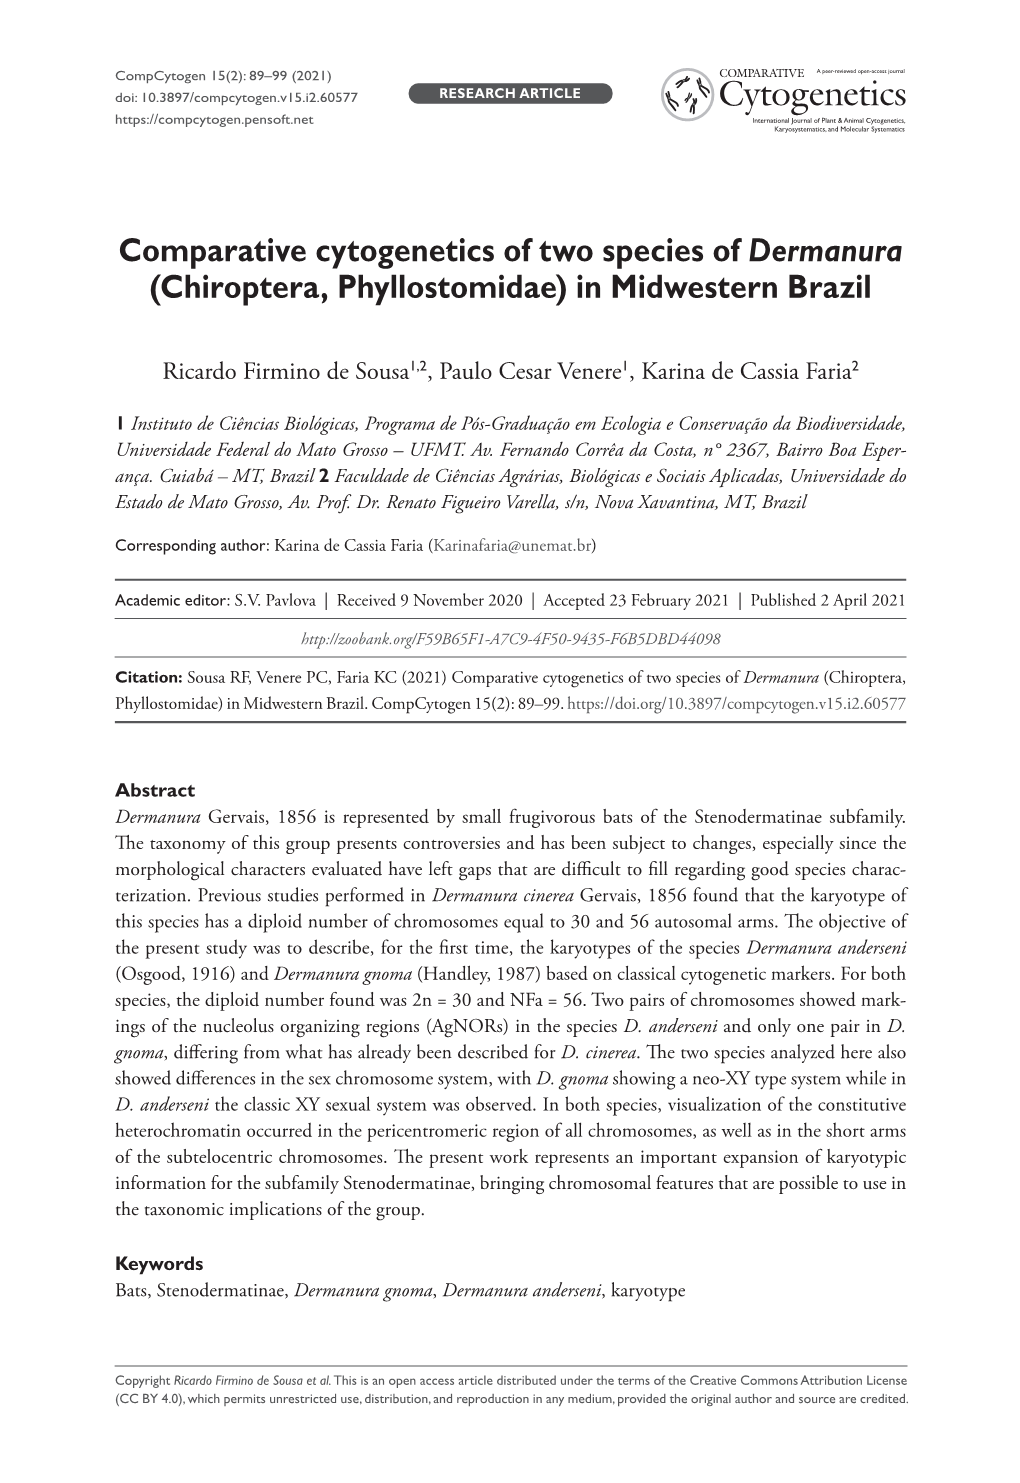 Comparative Cytogenetics of Two Species of Dermanura (Chiroptera, Phyllostomidae) in Midwestern Brazil